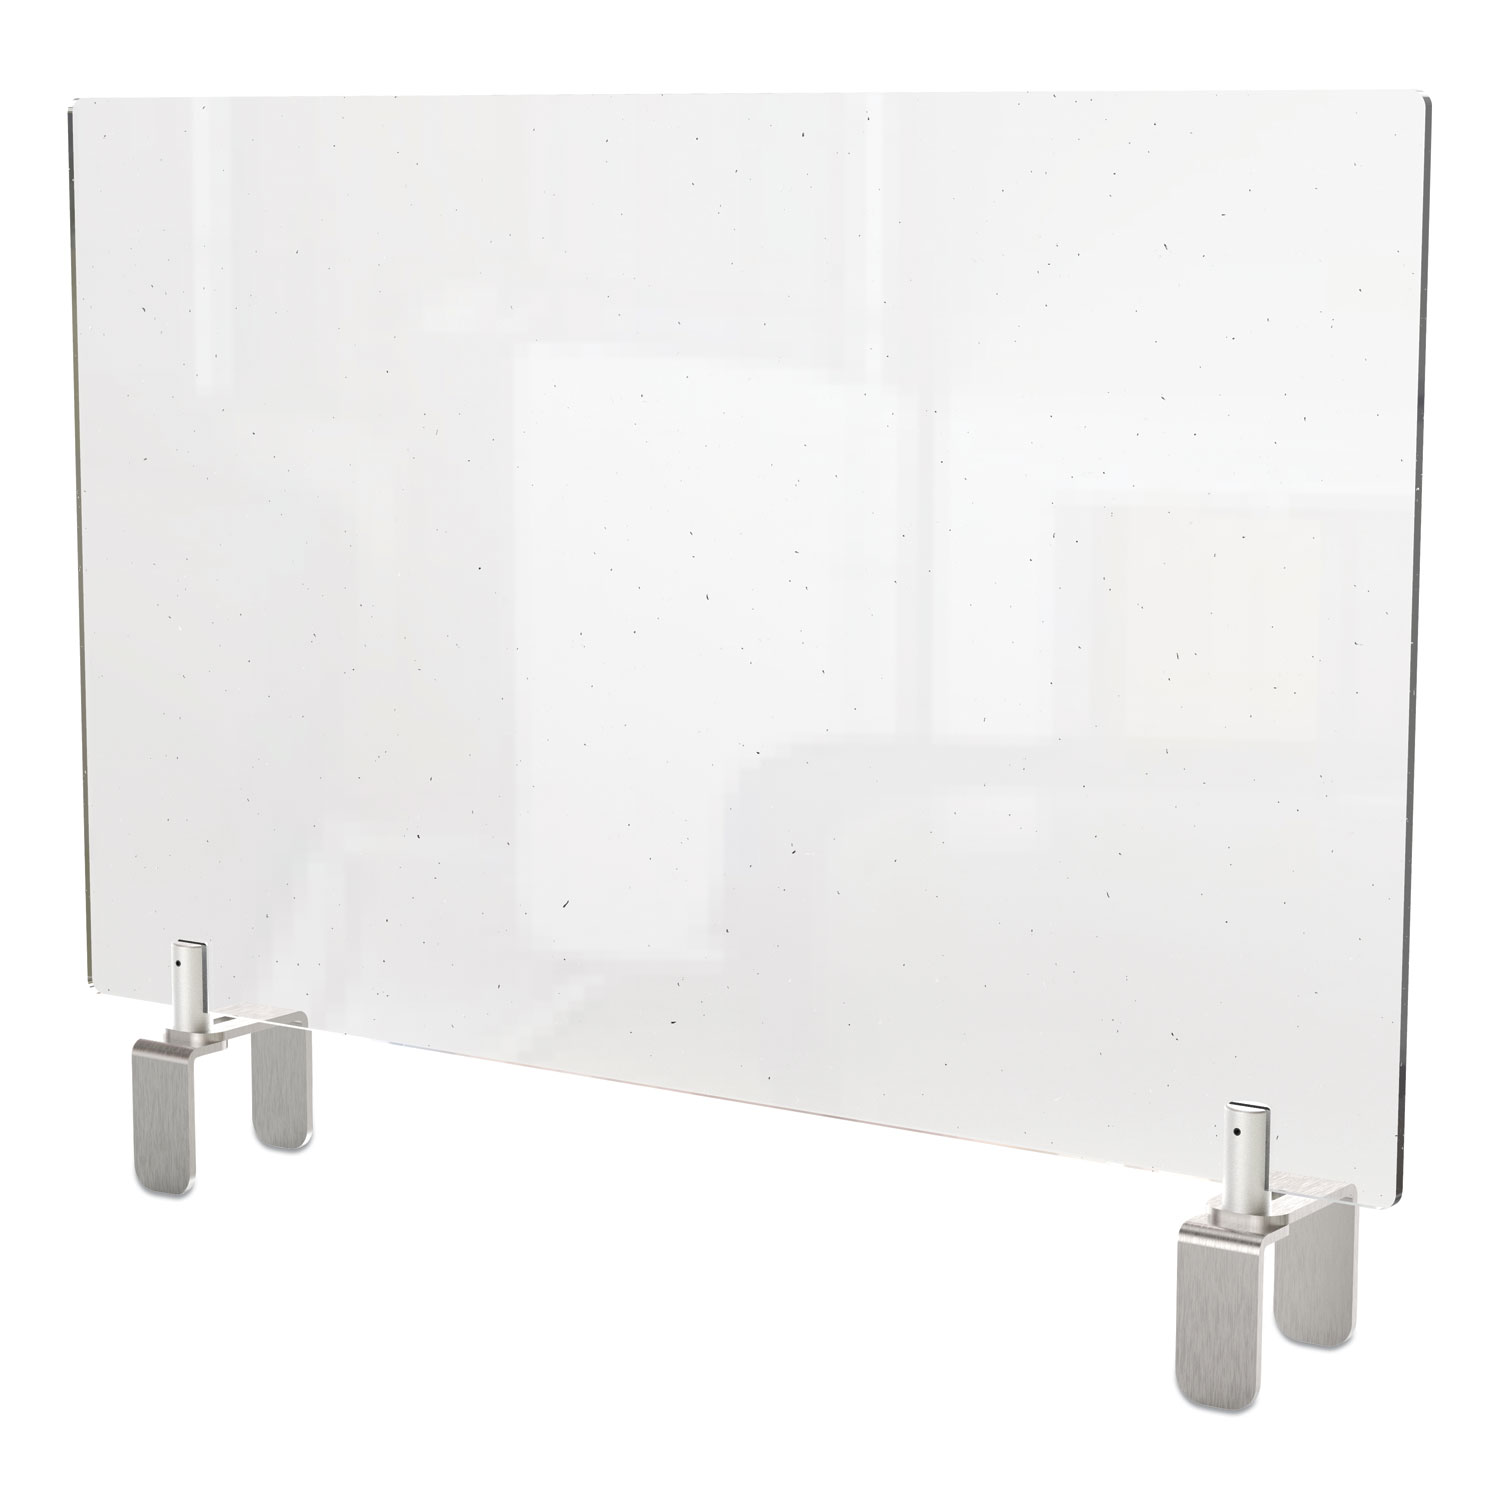  Ghent PEC2429-A Clear Partition Extender with Attached Clamp, 29 x 3.88 x 24, Thermoplastic Sheeting (GHEPEC2429A) 